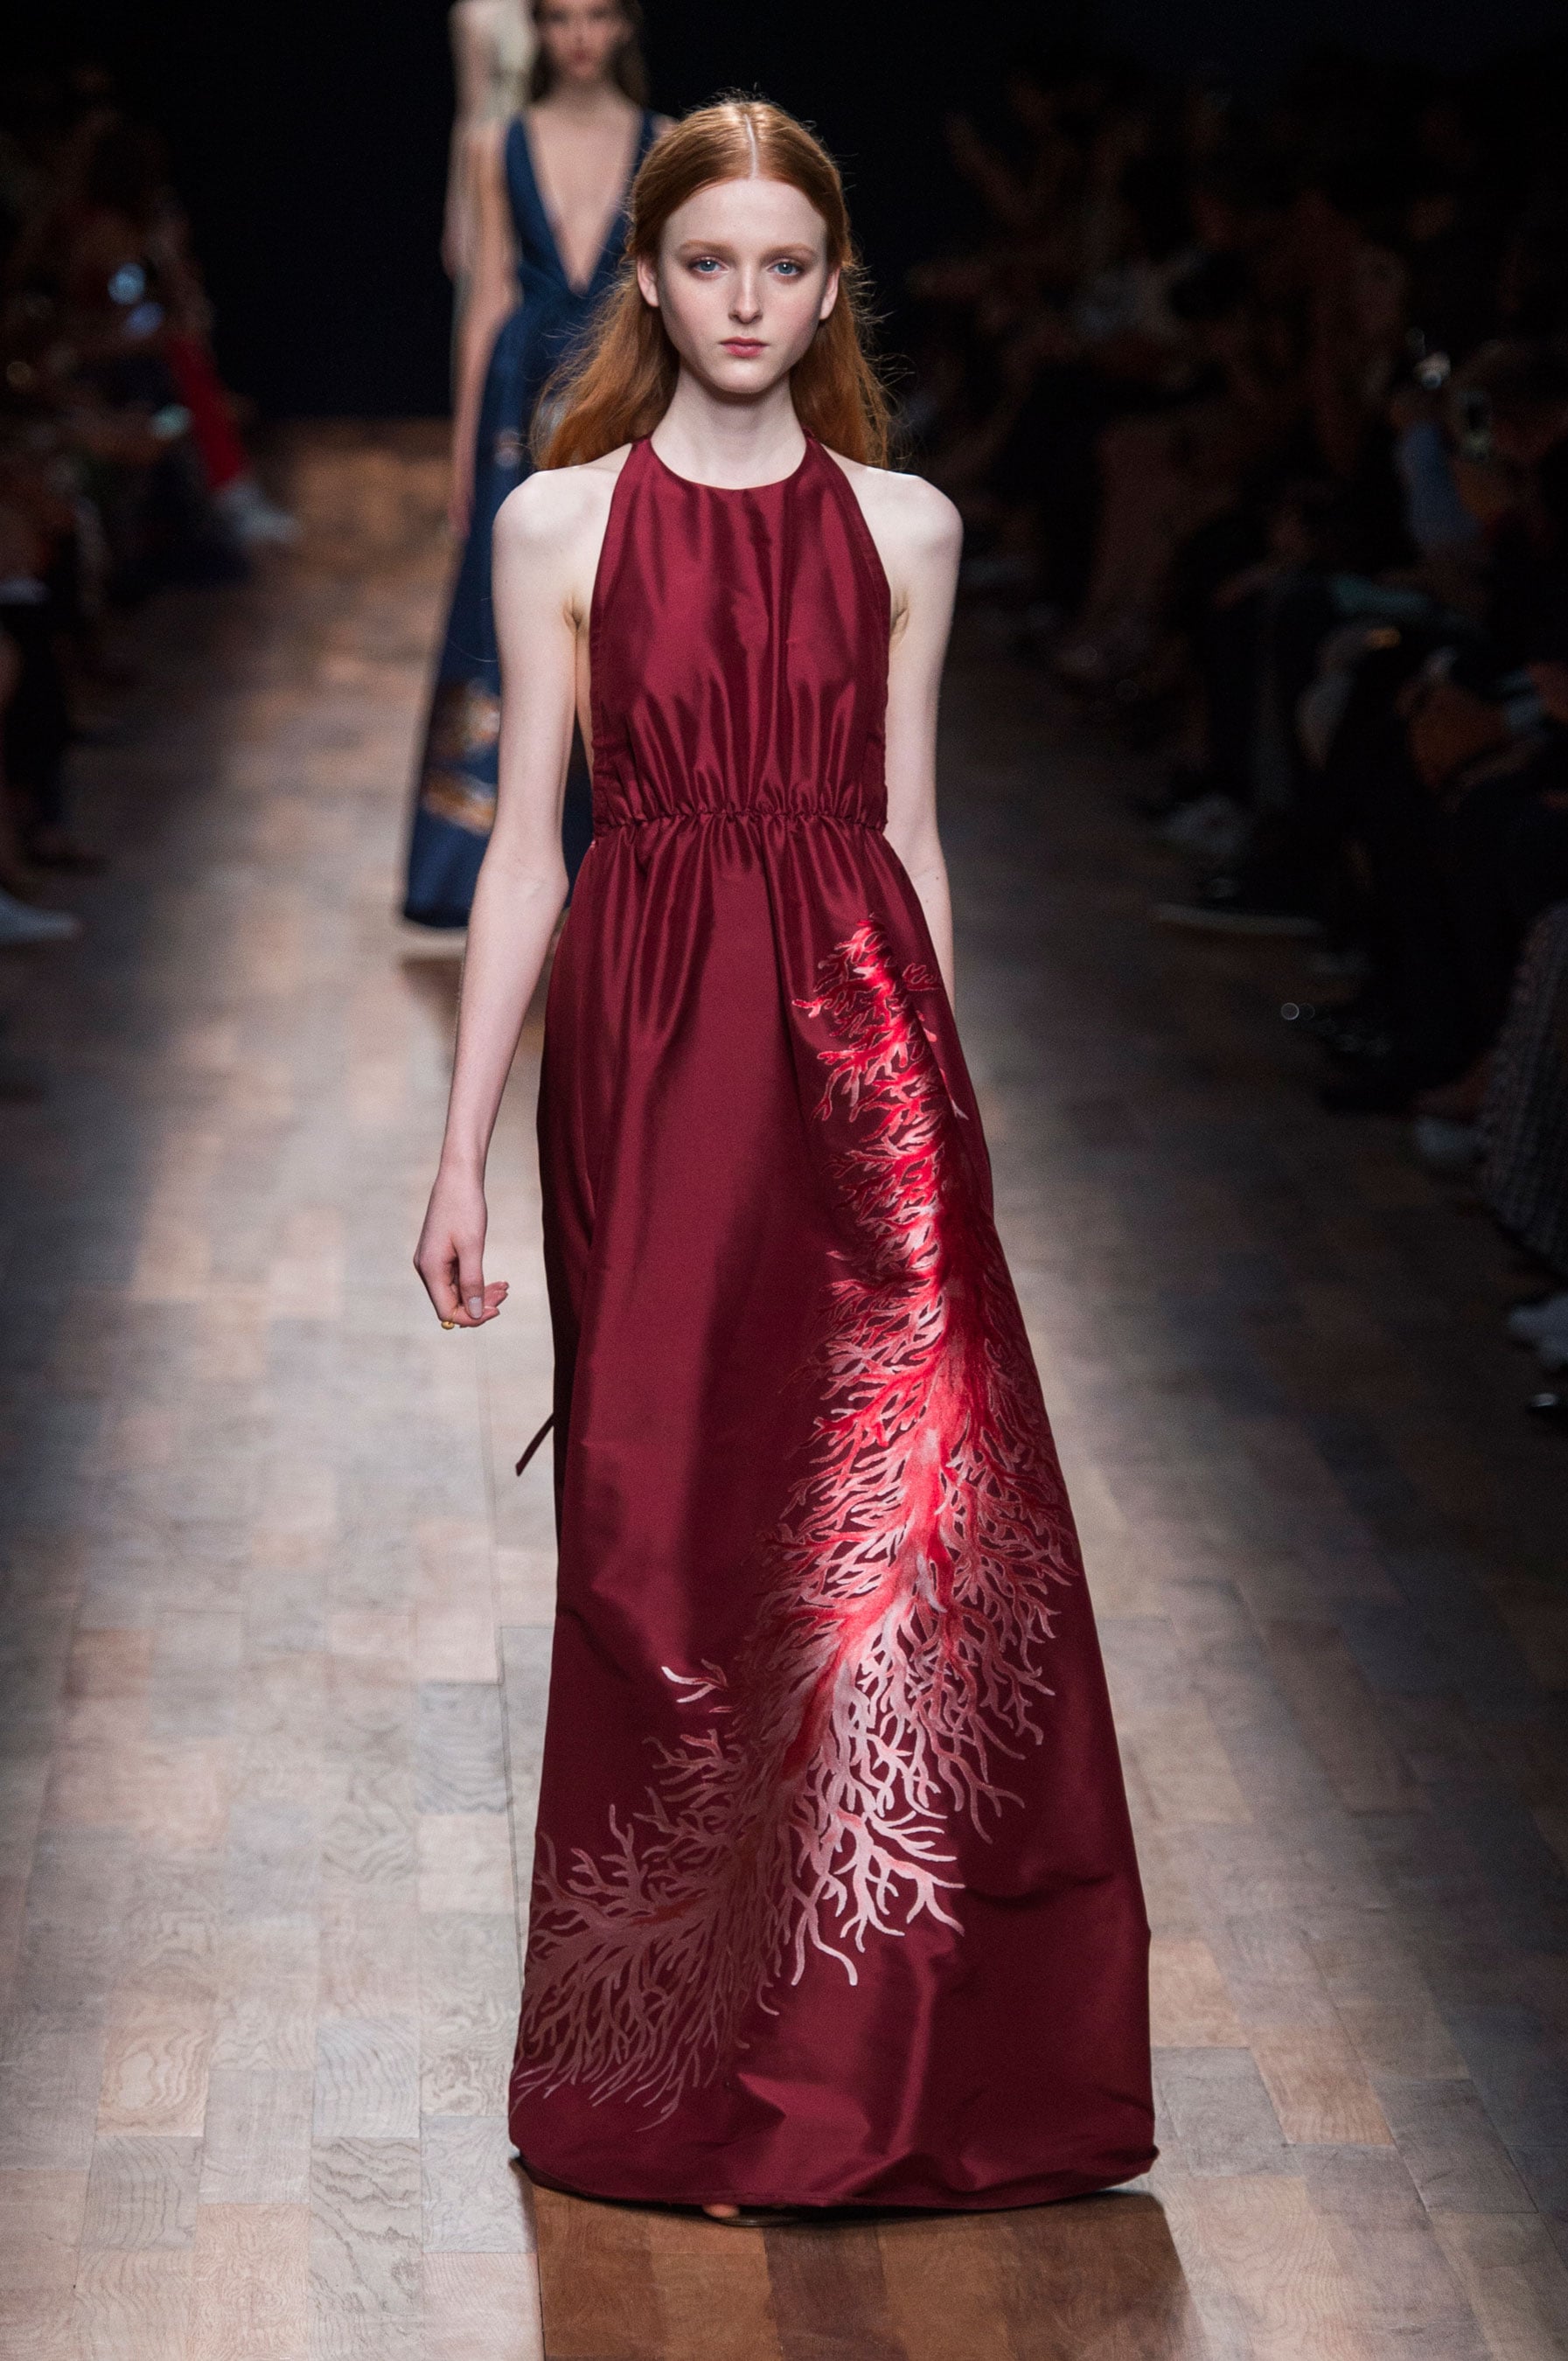 Valentino Spring 2015 | Behold, the Most Gorgeous Gowns of Fashion Week POPSUGAR Fashion Photo 7